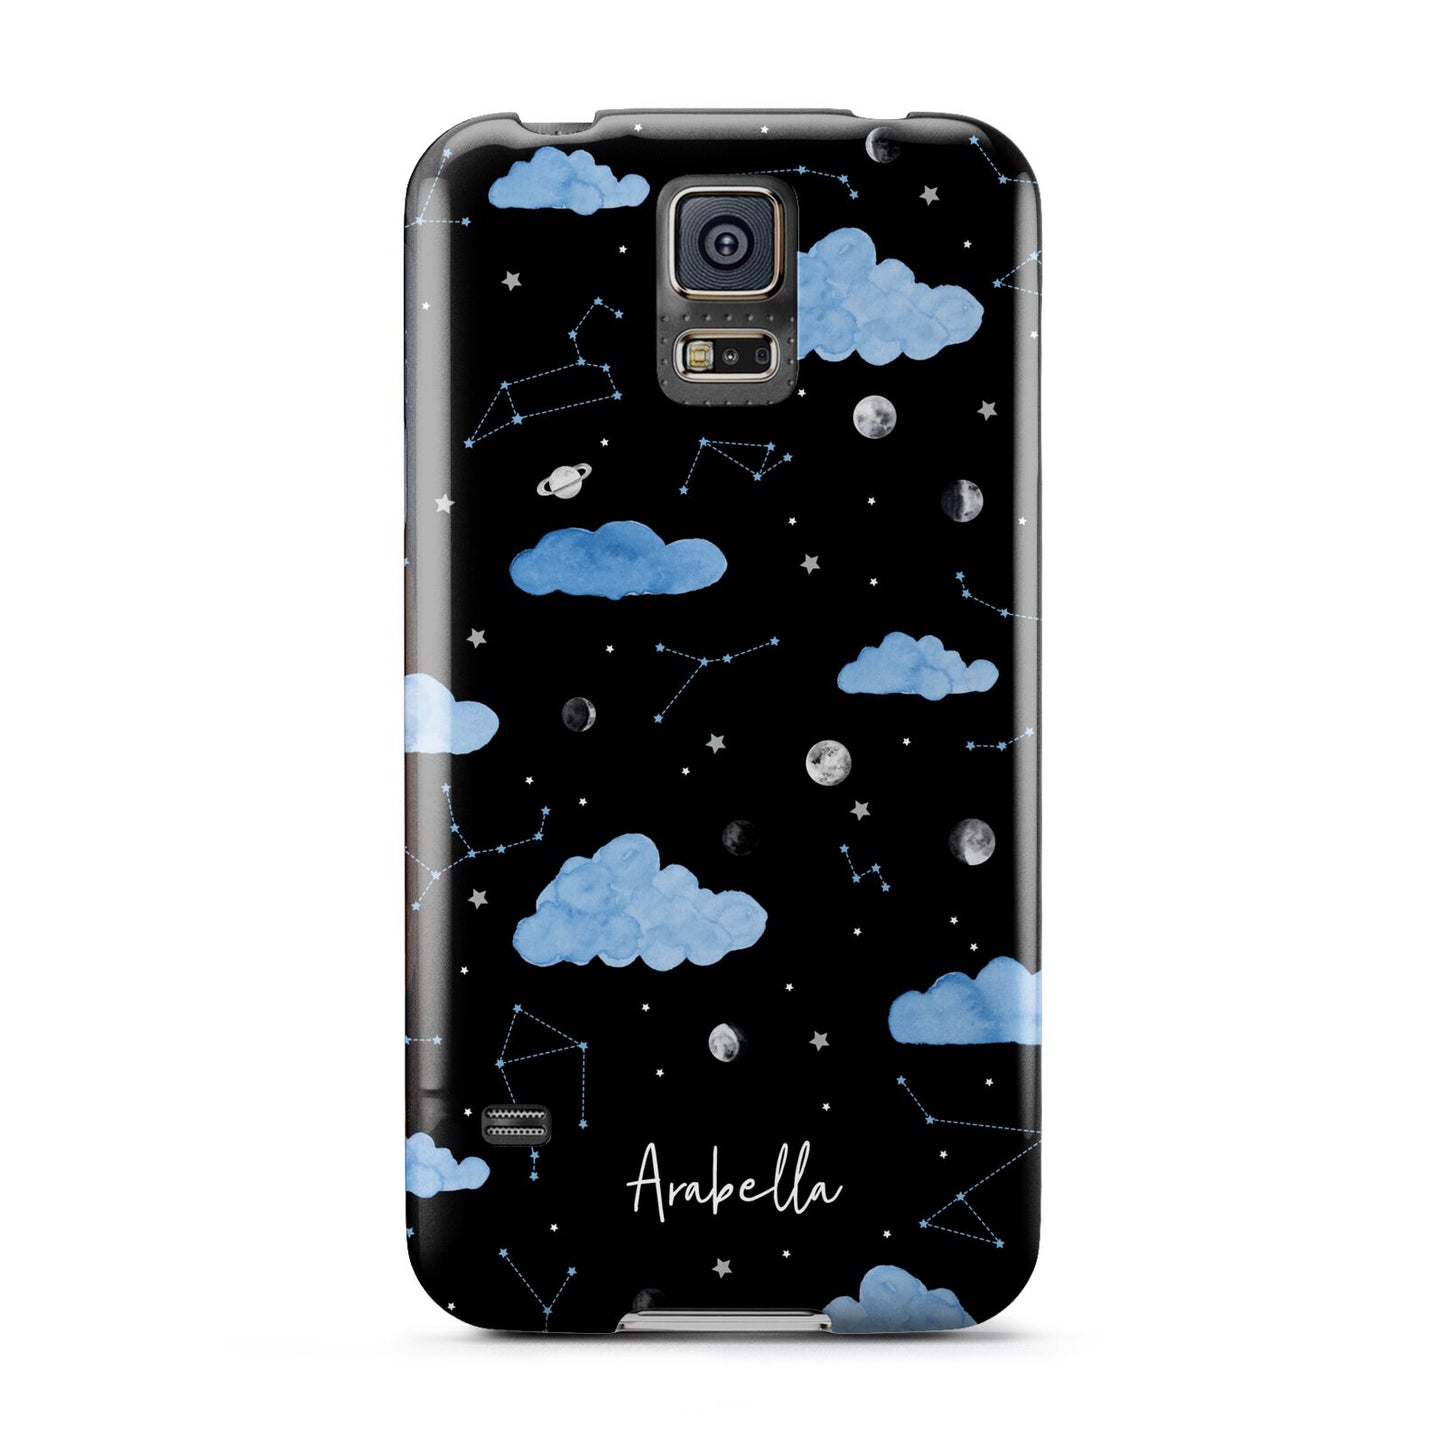 Cloudy Night Sky with Name Samsung Galaxy S5 Case